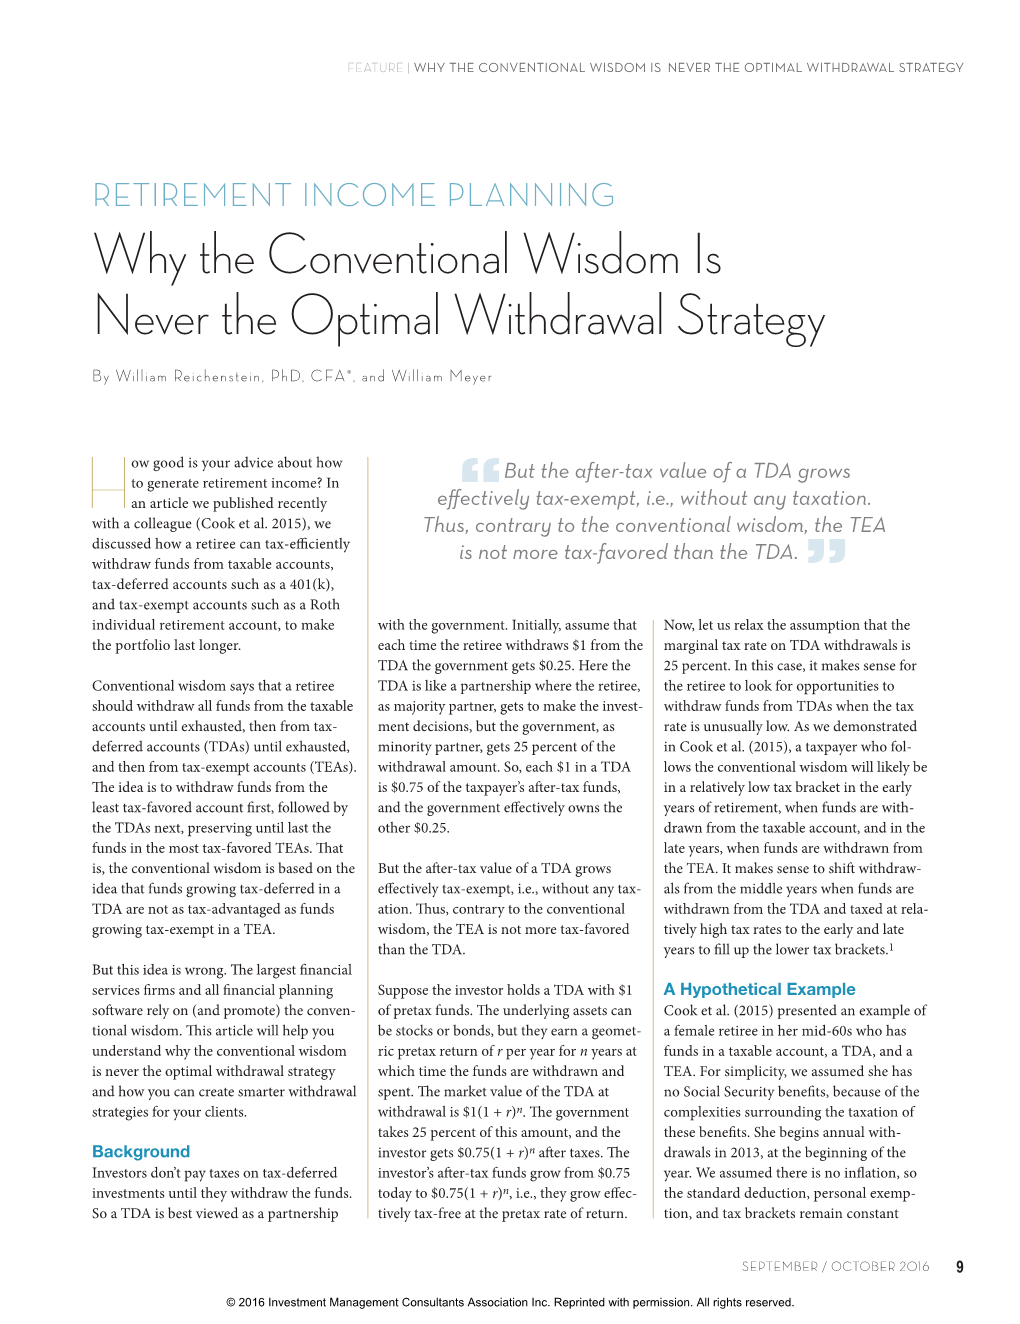 Why the Conventional Wisdom Is Never the Optimal Withdrawal Strategy